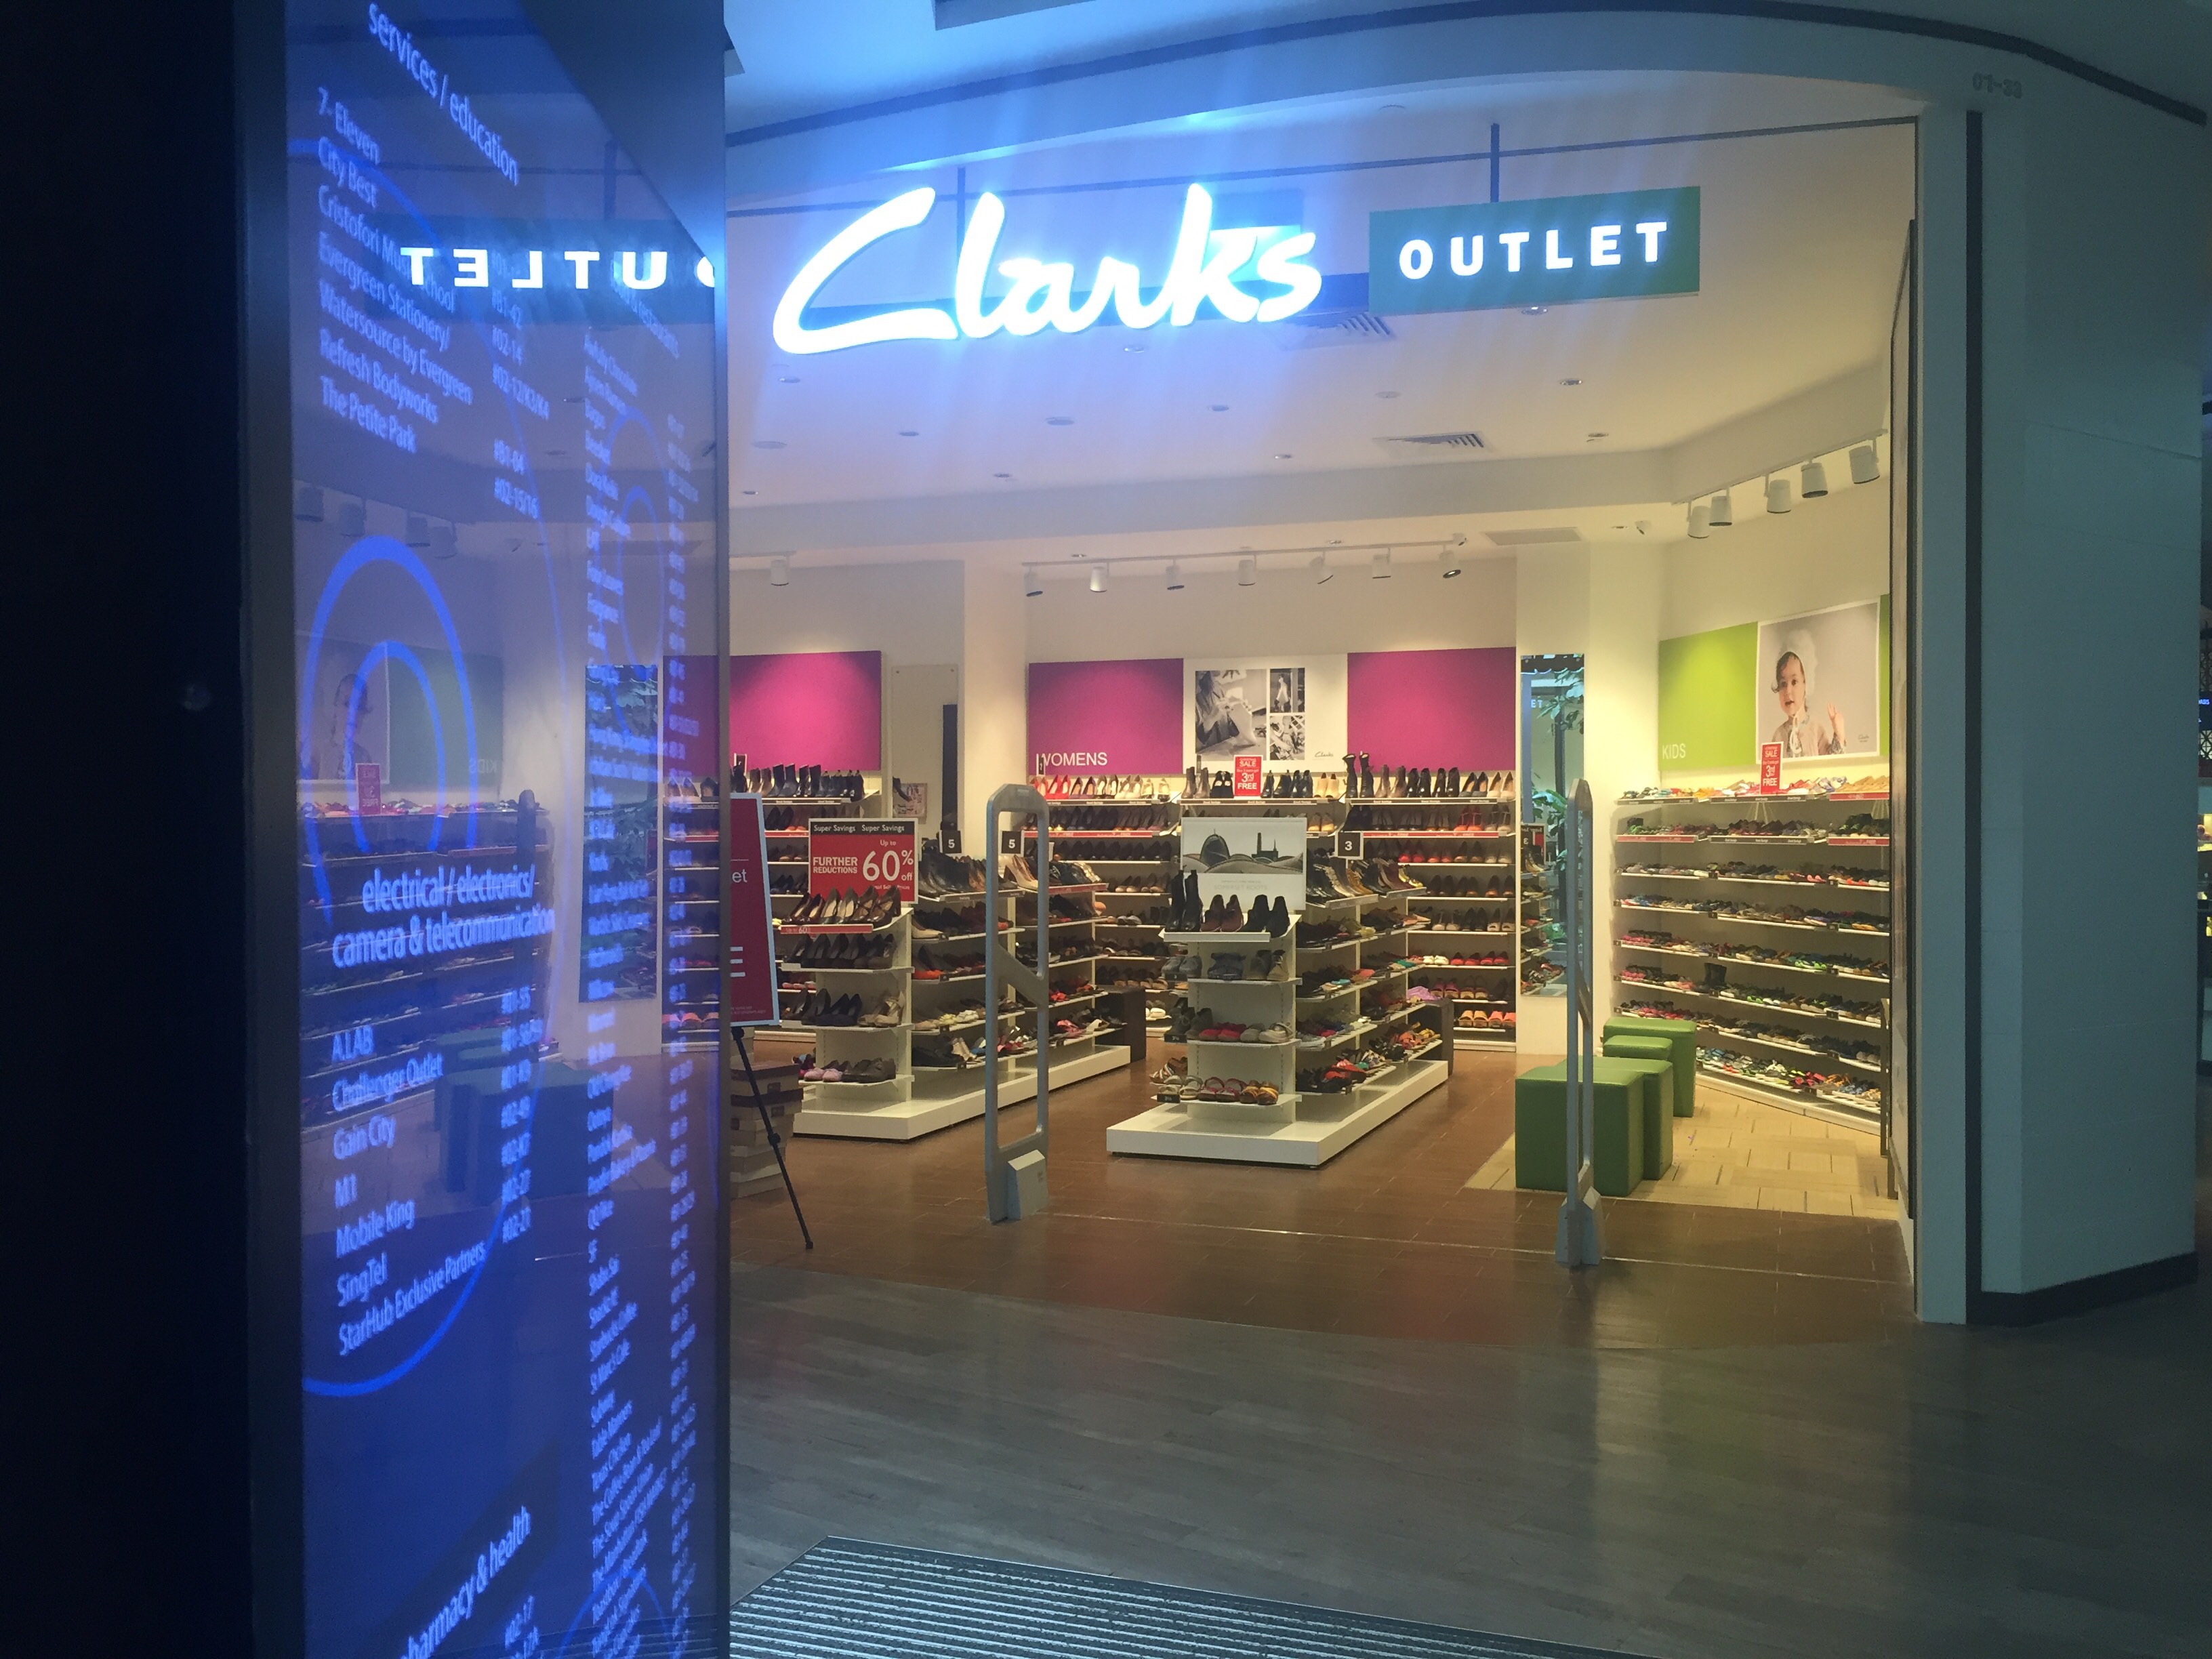 nearest clarks outlet to me